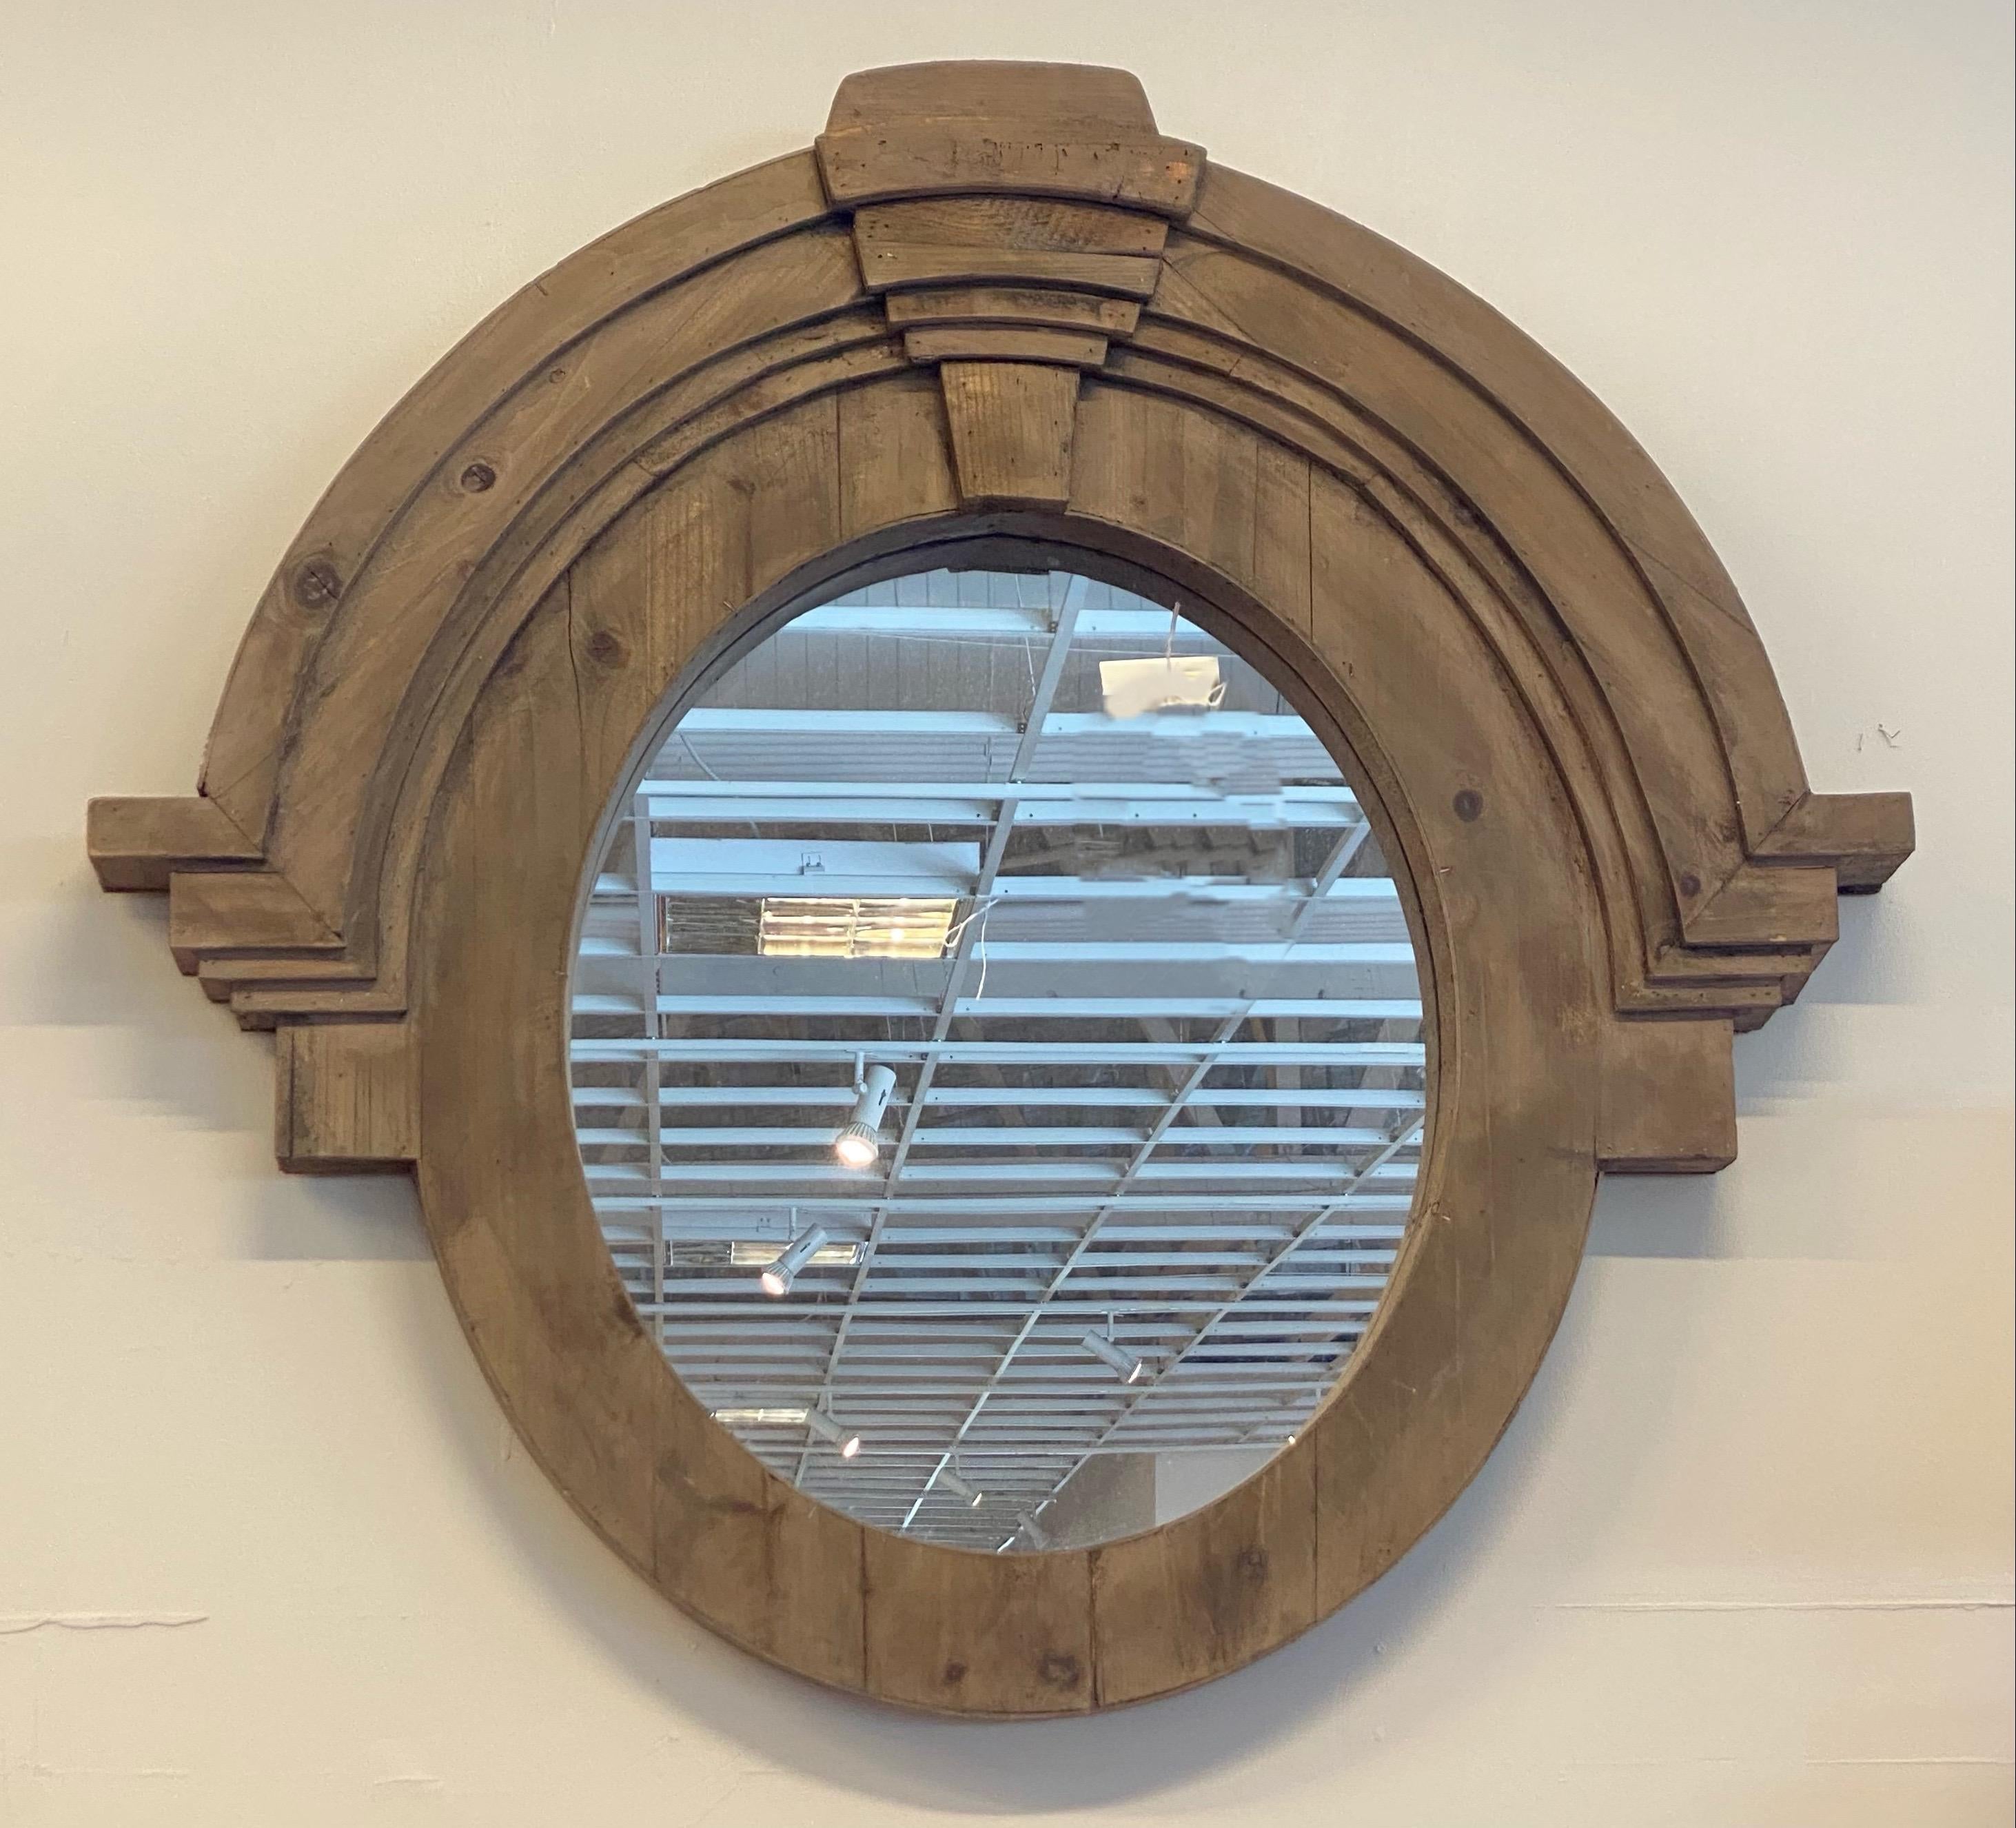 Round wood mirror with heavy frame RH

Measures: 37